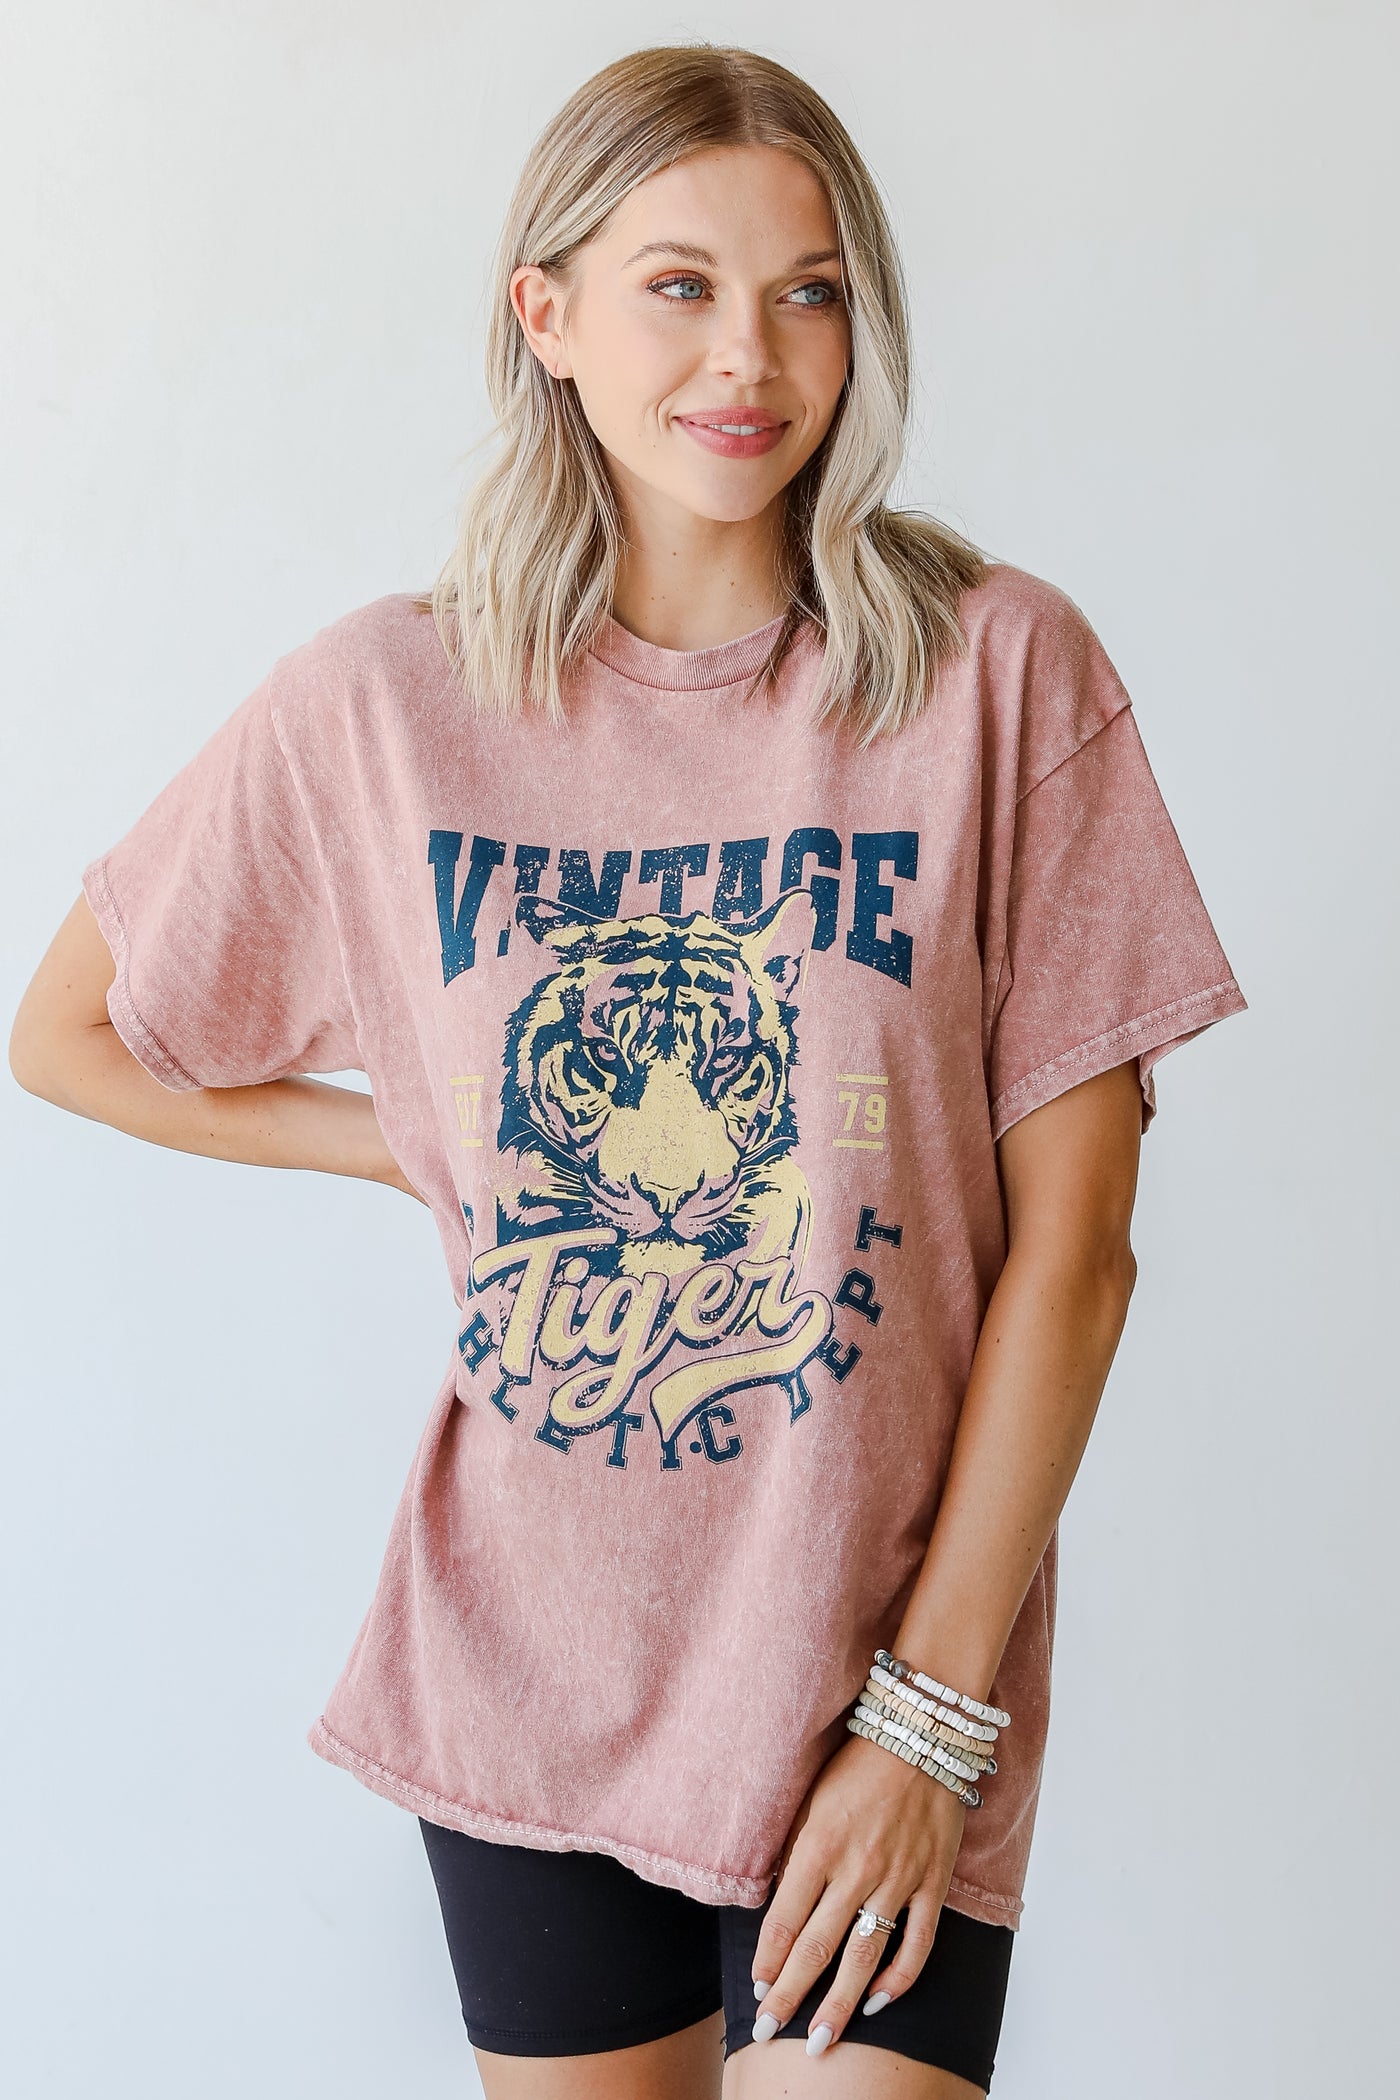 Vintage Tiger Tee from dress up